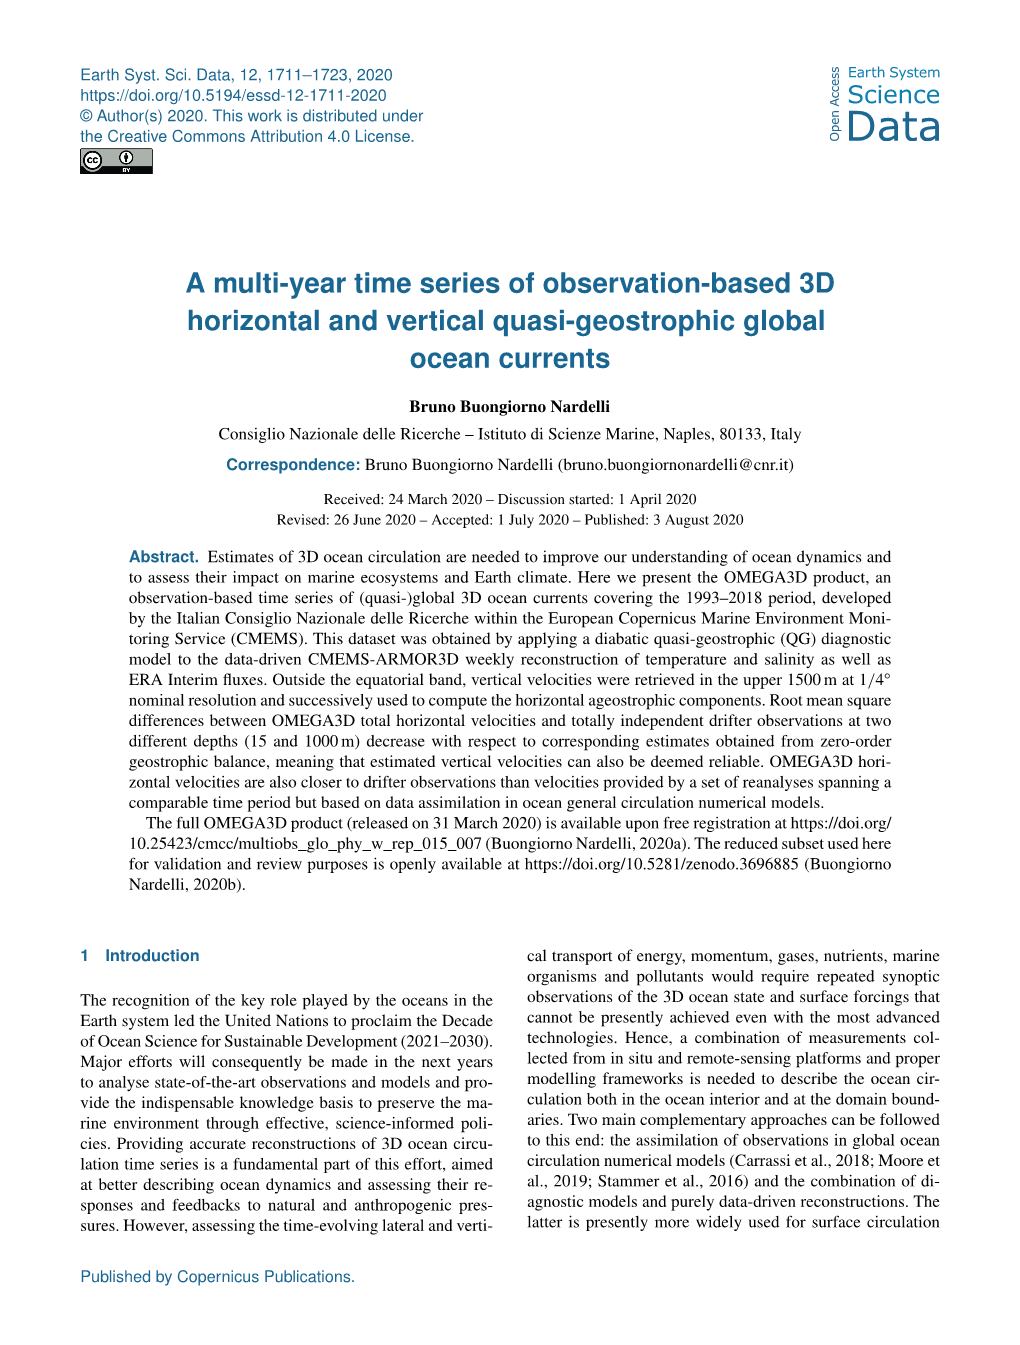 A Multi-Year Time Series of Observation-Based 3D Horizontal and Vertical Quasi-Geostrophic Global Ocean Currents